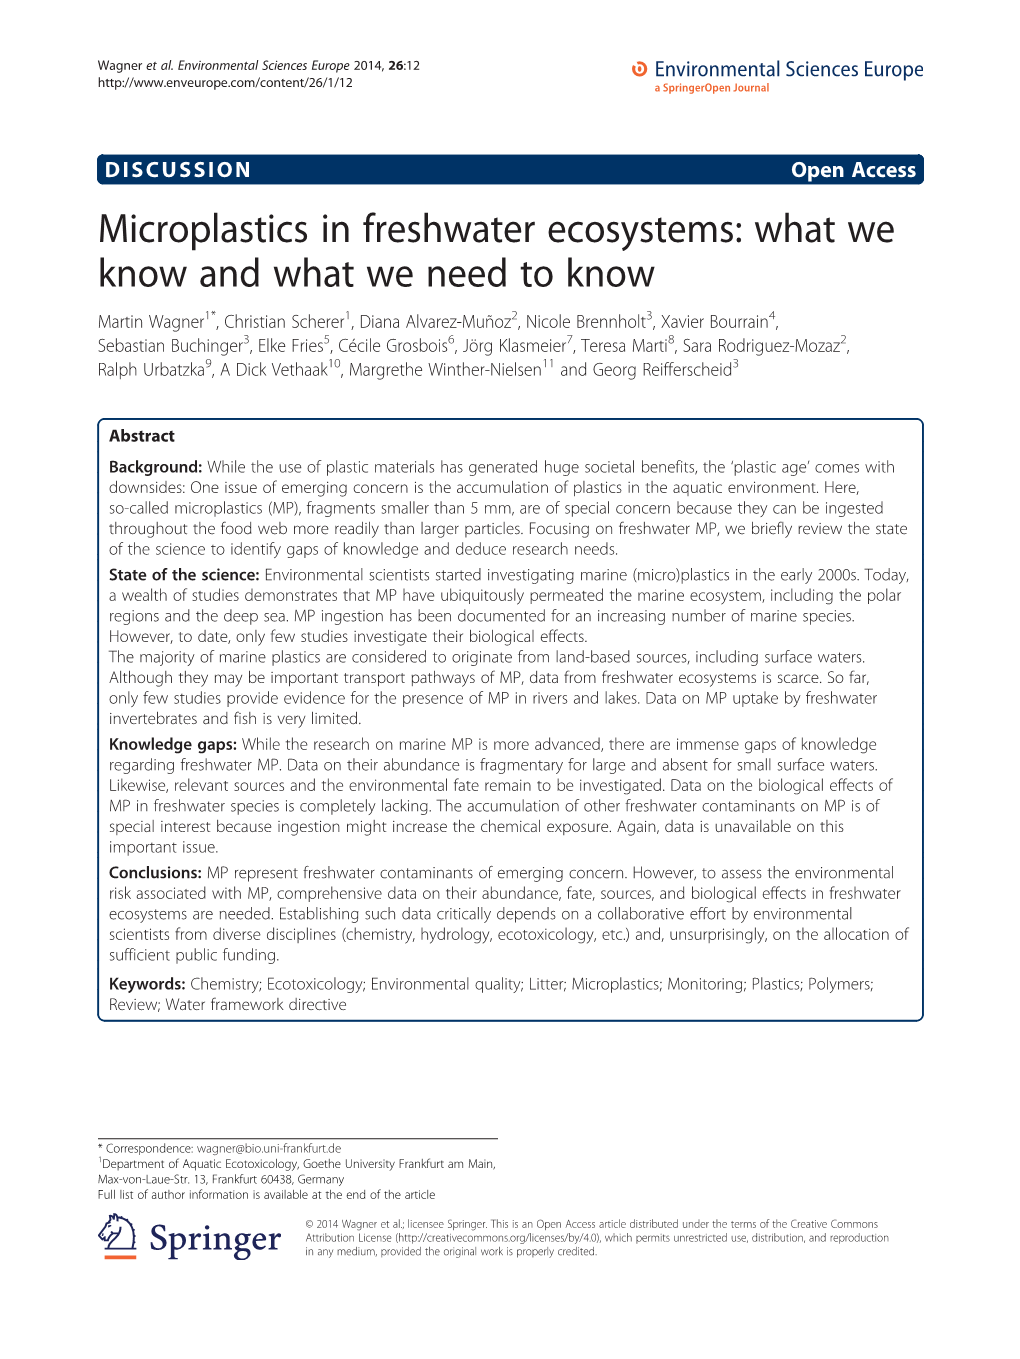 Microplastics in Freshwater Ecosystems: What We Know